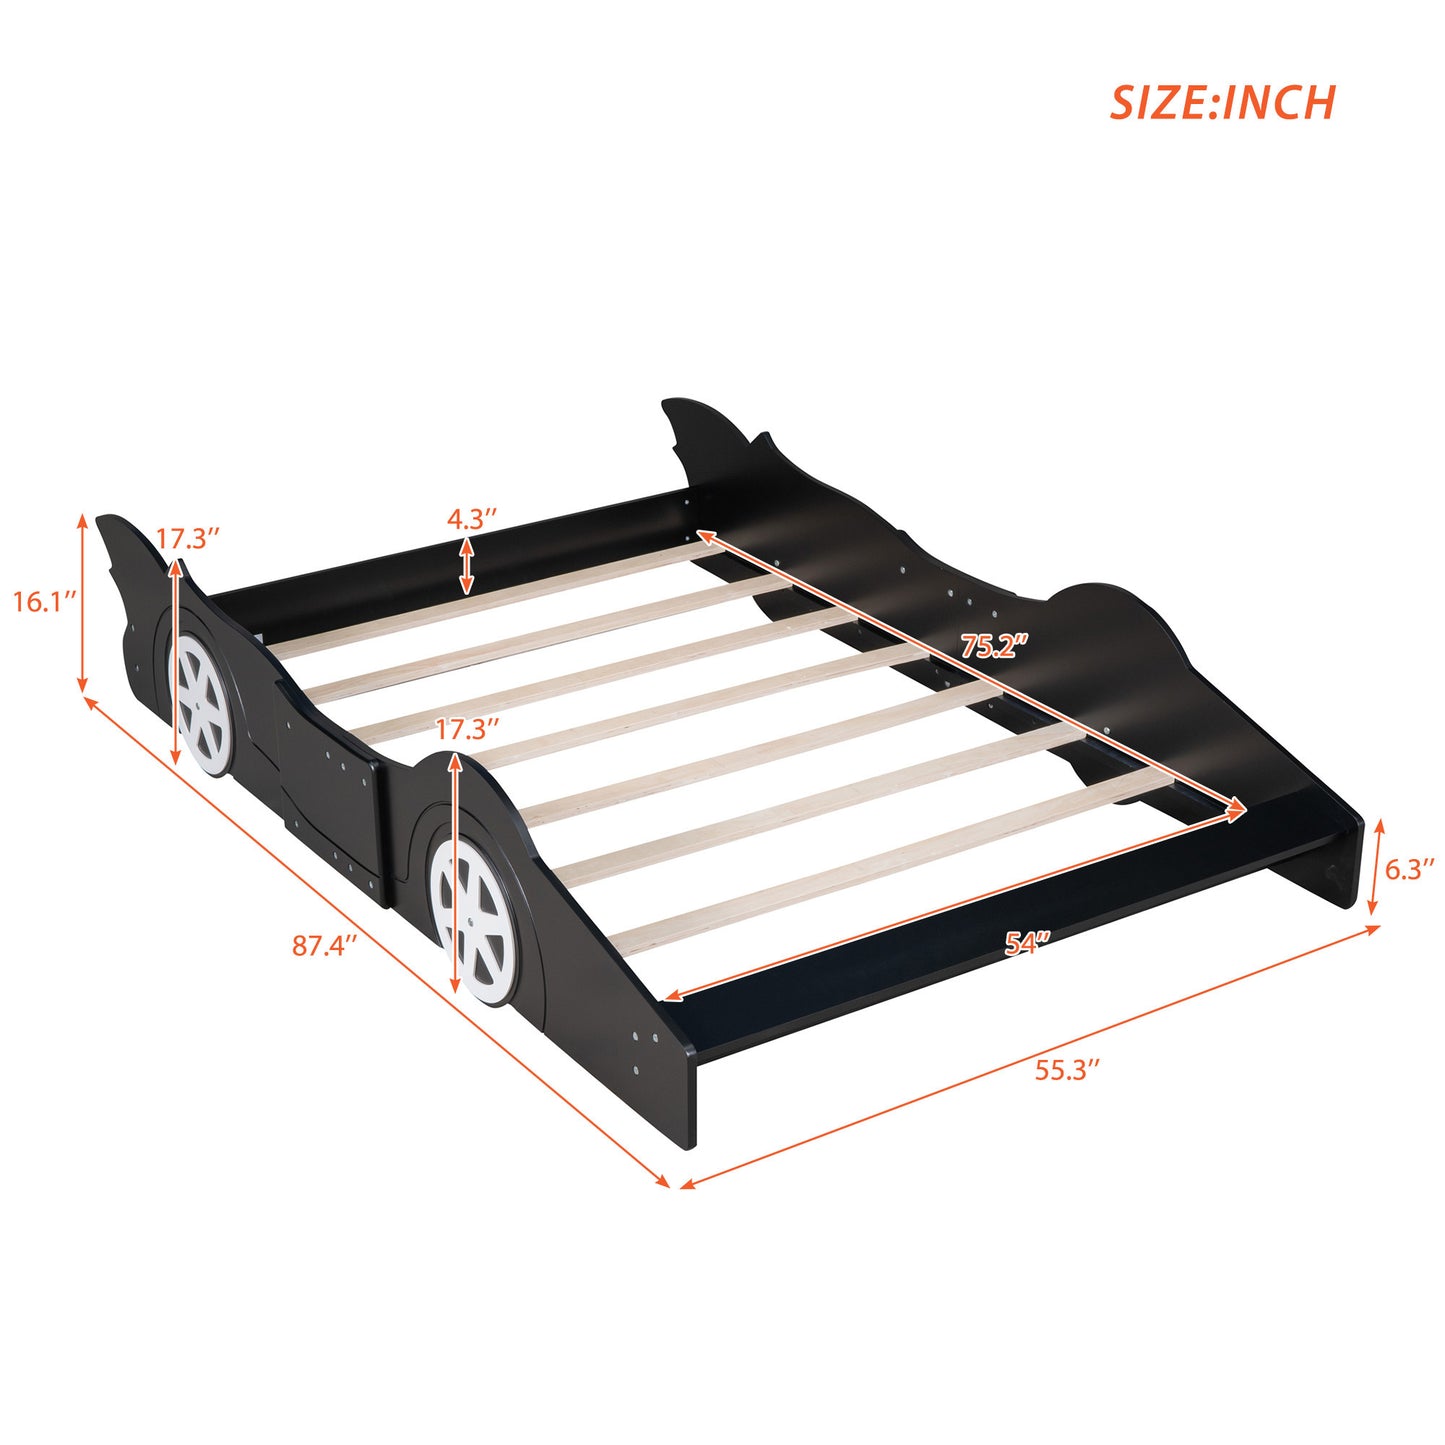 Full Size Race Car-Shaped Platform Bed with Wheels,Black